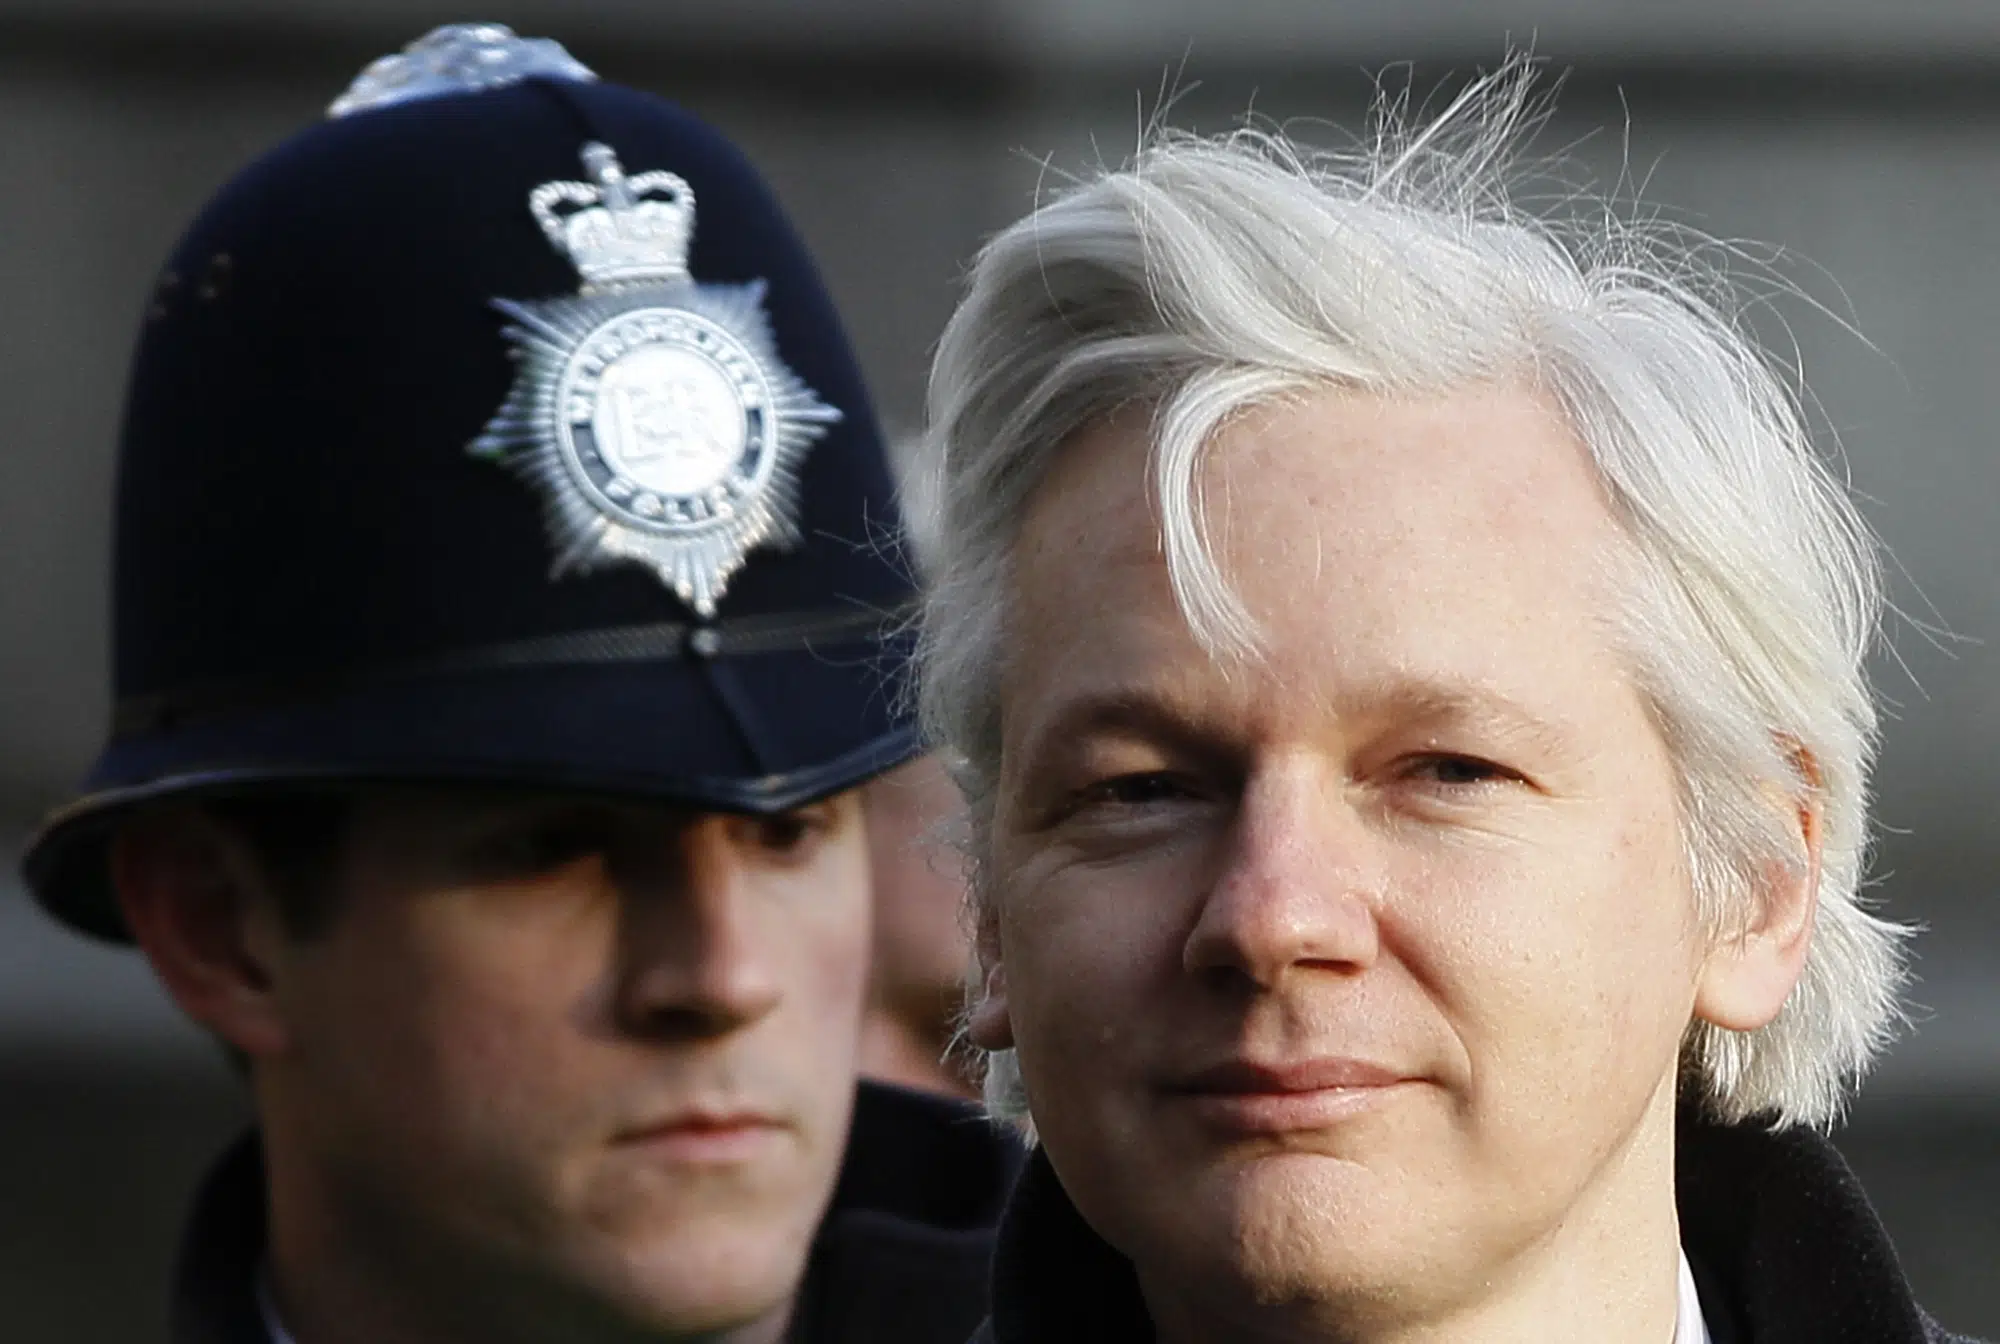 England’s High Court Approves Extradition of WikiLeaks Founder for Espionage Trial